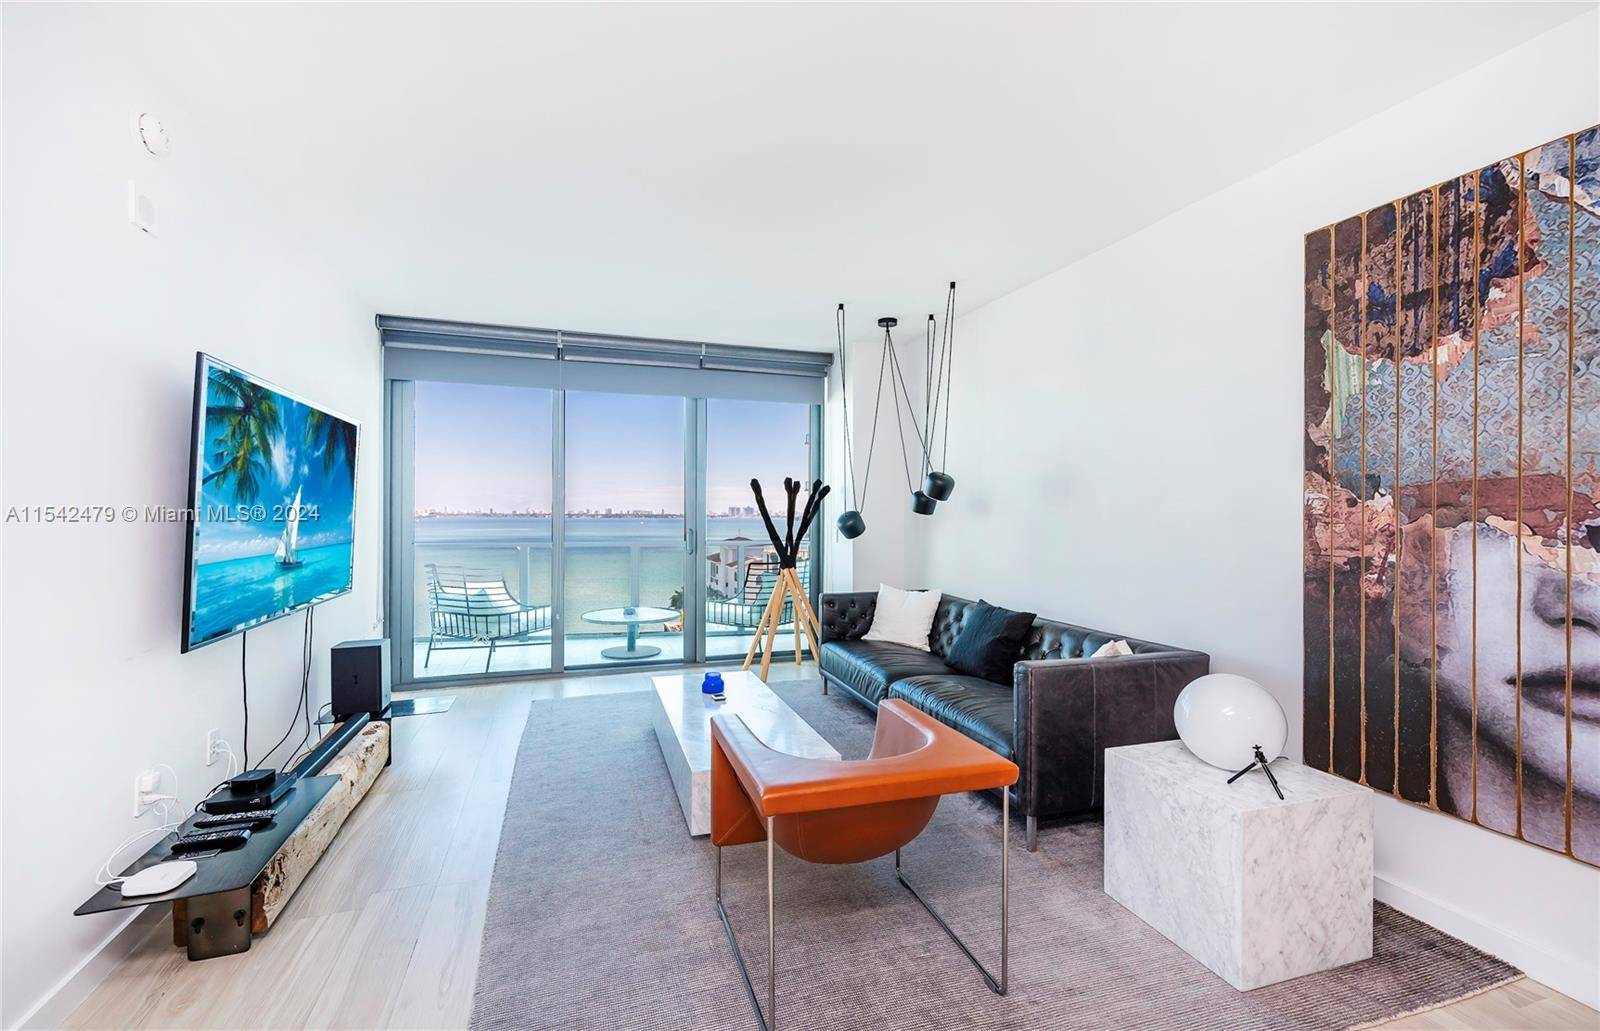 Amazing opportunity to own this stunning 2 bedroom, 2 bathroom condo at Icon Bay in Edgewater, open kitchen with upgraded subzero refrigerator, wine cooler, walk in closets, electric blinds in ...